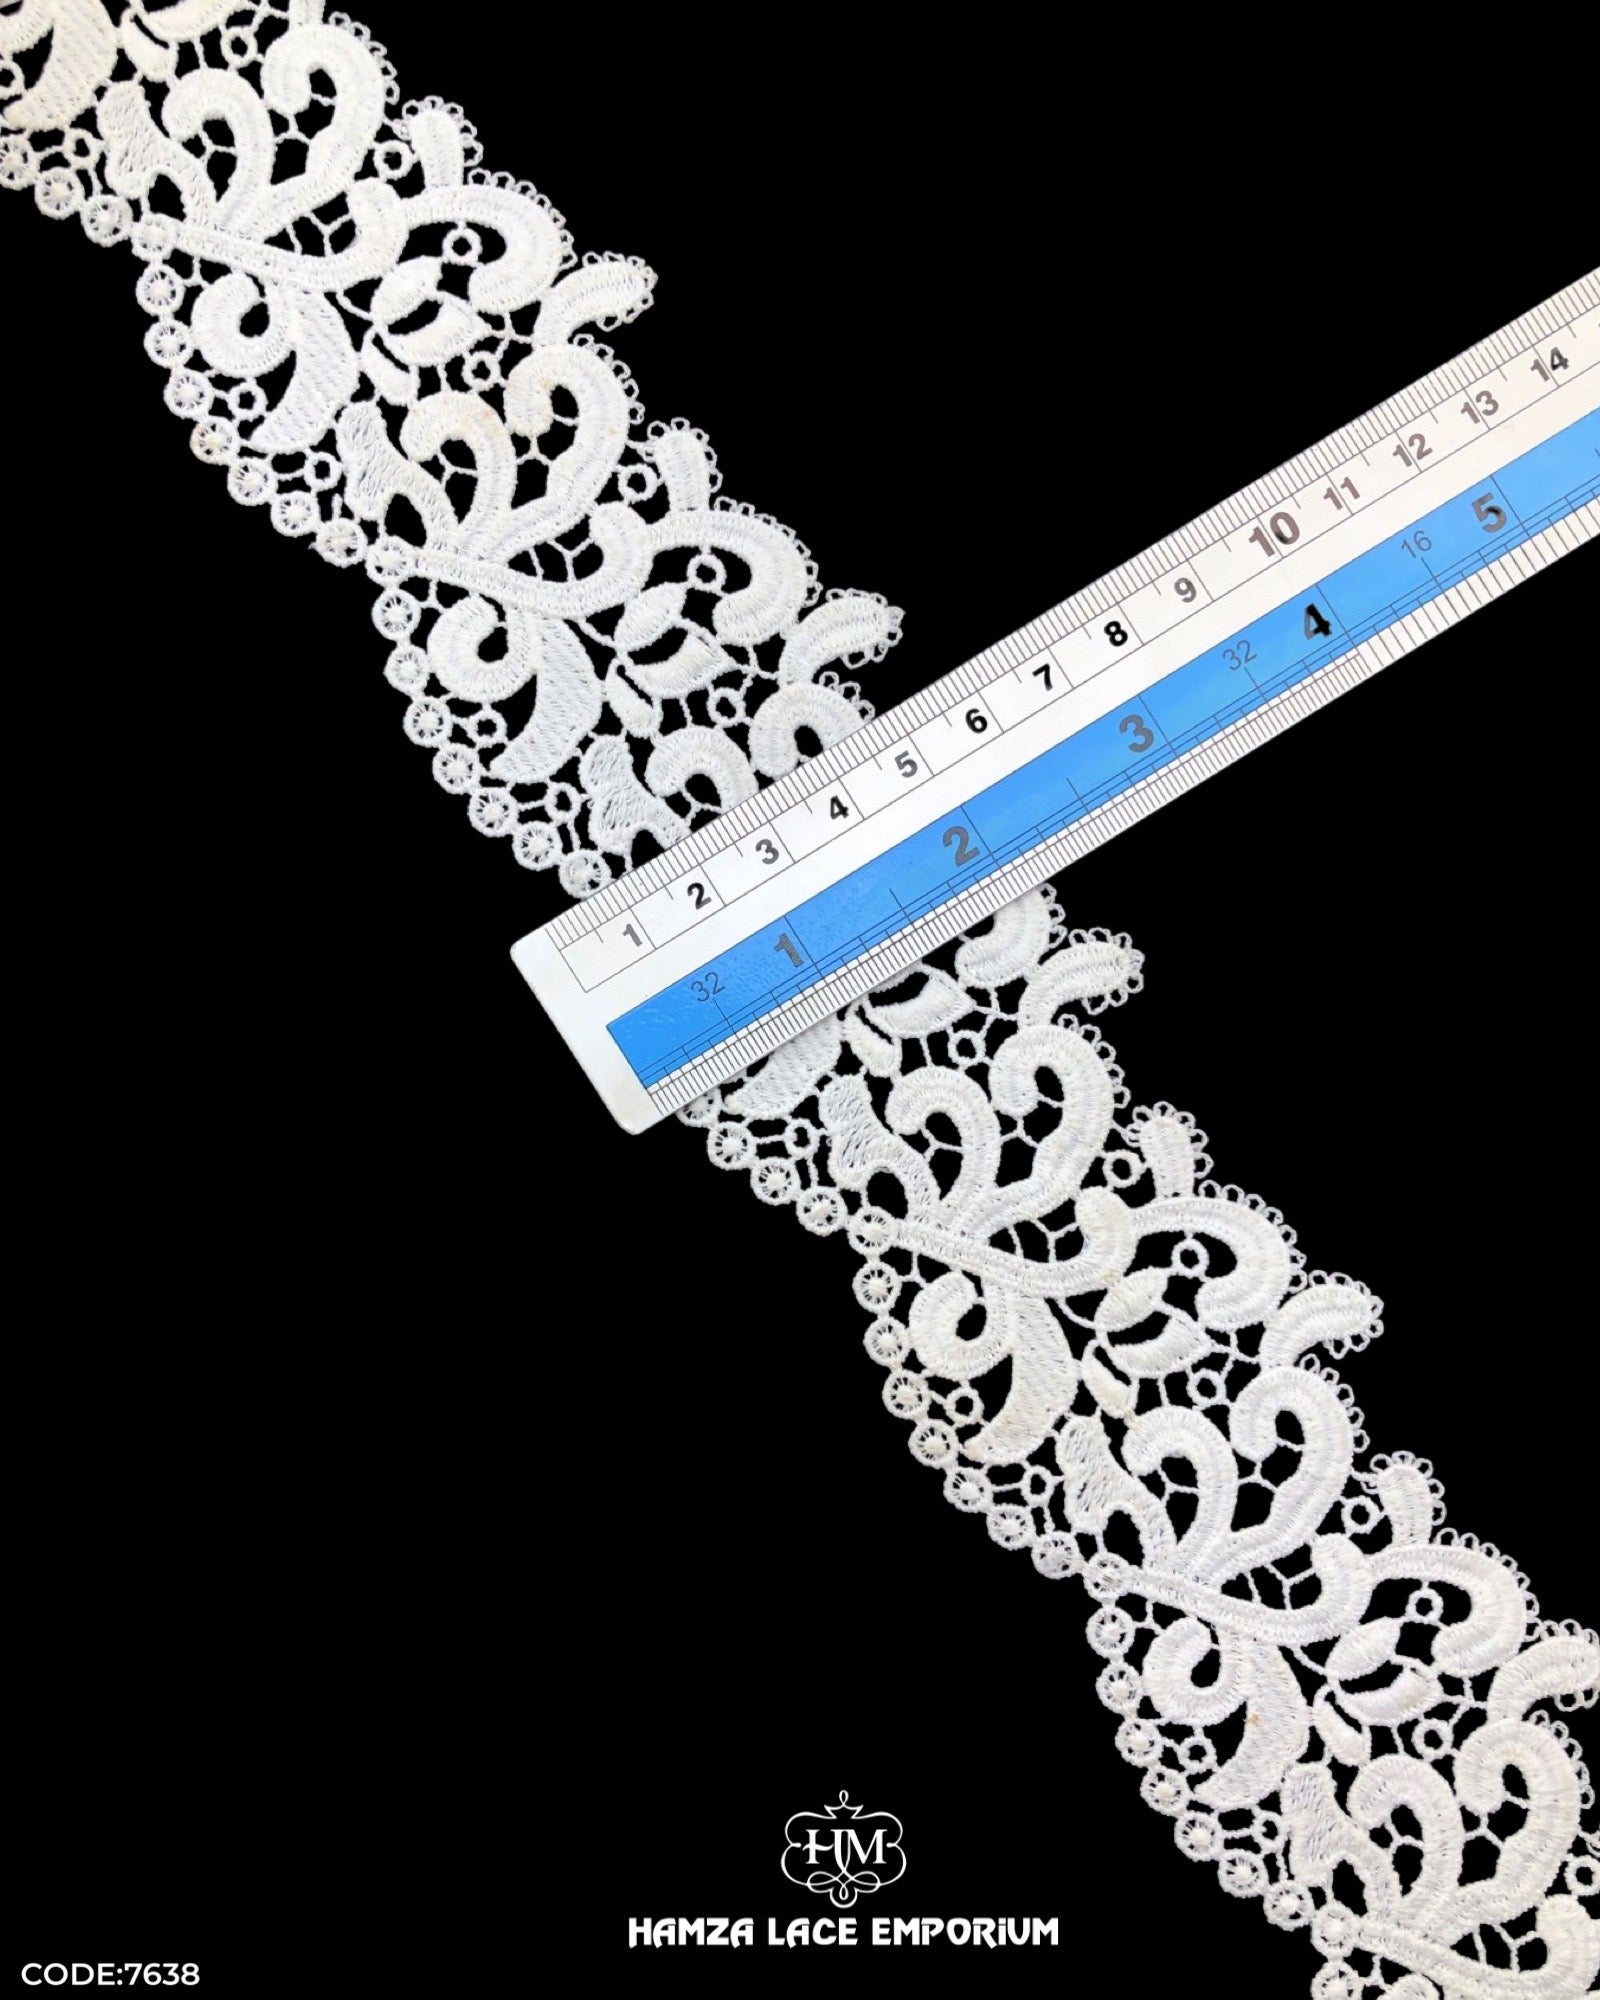 Size of the 'Flower Design Lace 7638' is shown as '2.25' inches with the help of a ruler